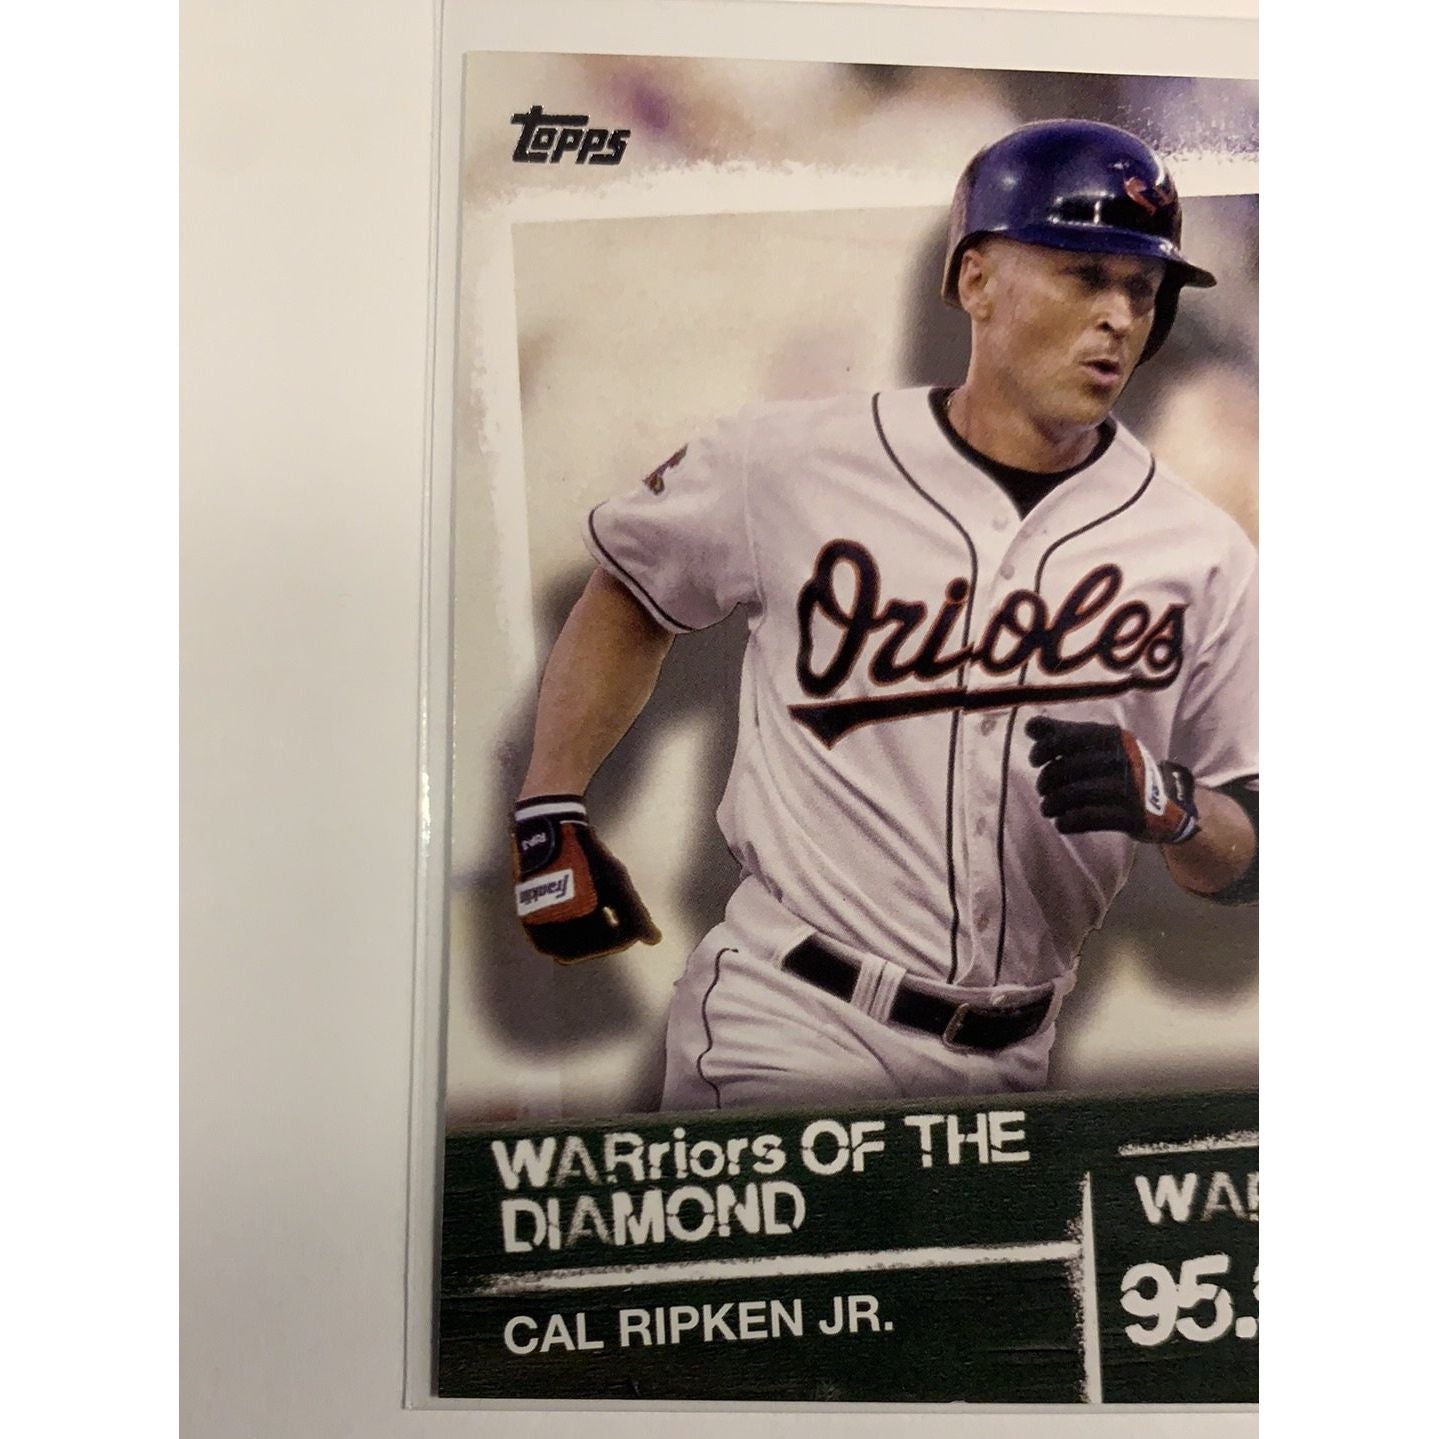  2020 Topps WARiors of the Diamond Cal Ripkin Jr  Local Legends Cards & Collectibles